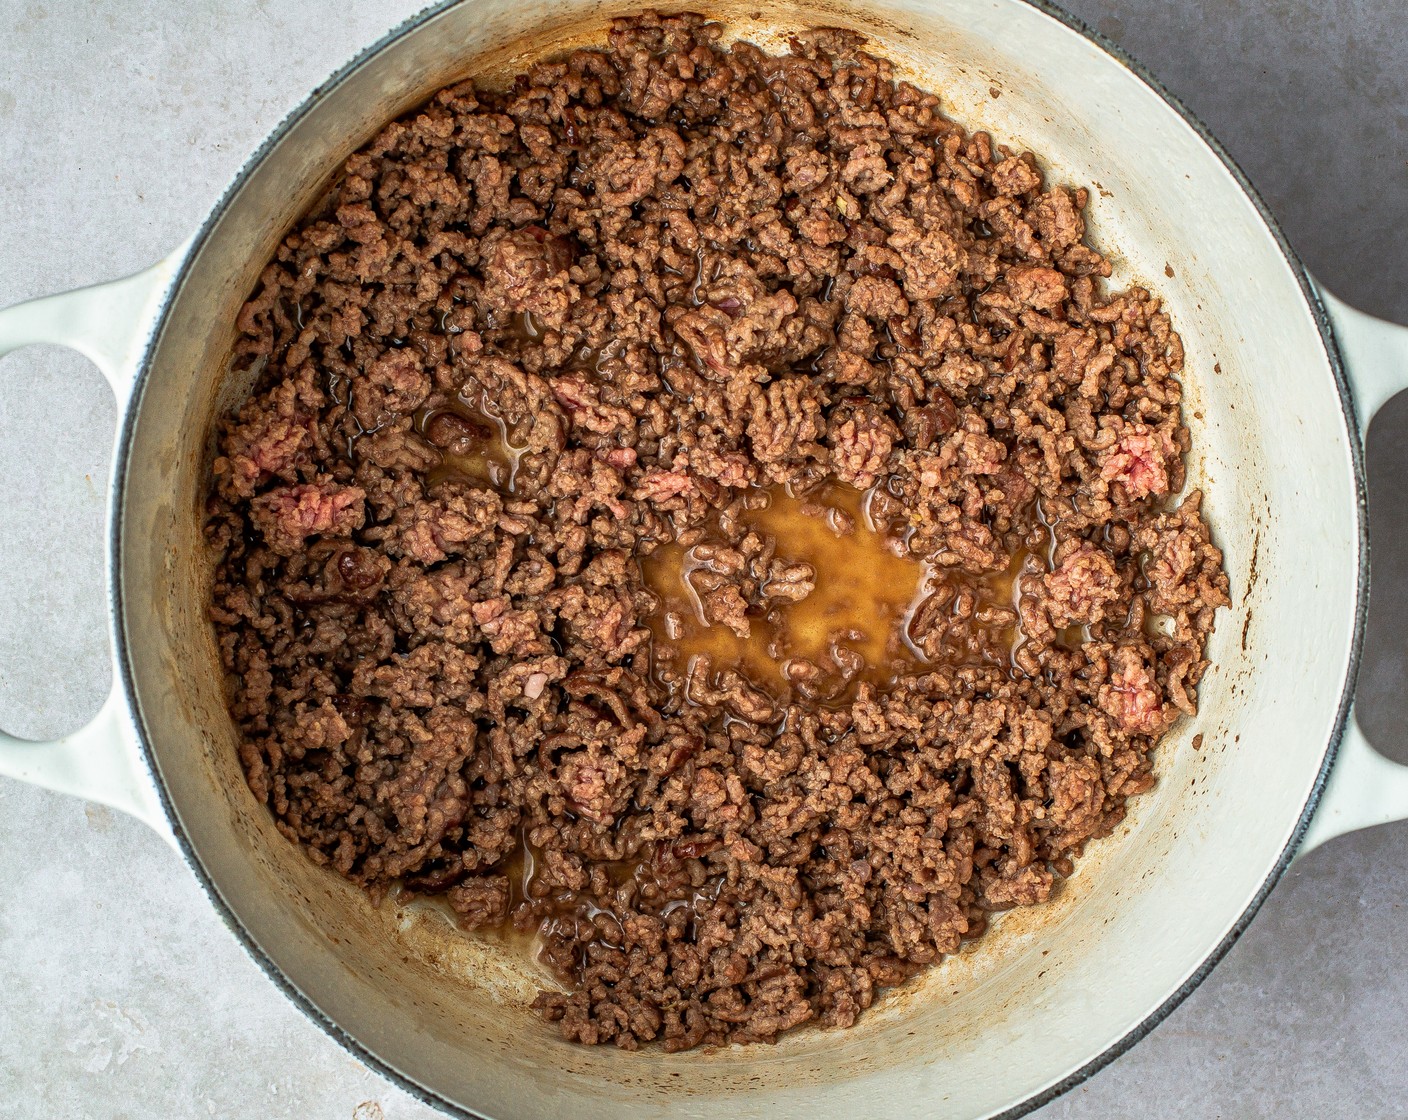 step 3 Carefully dry the pot with a paper towel, add Canola Oil (1 1/2 Tbsp), and heat to medium. Add in 80/20 Lean Ground Beef (1 lb) and stir to break into smaller crumbles. Cook until the meat is no longer pink.